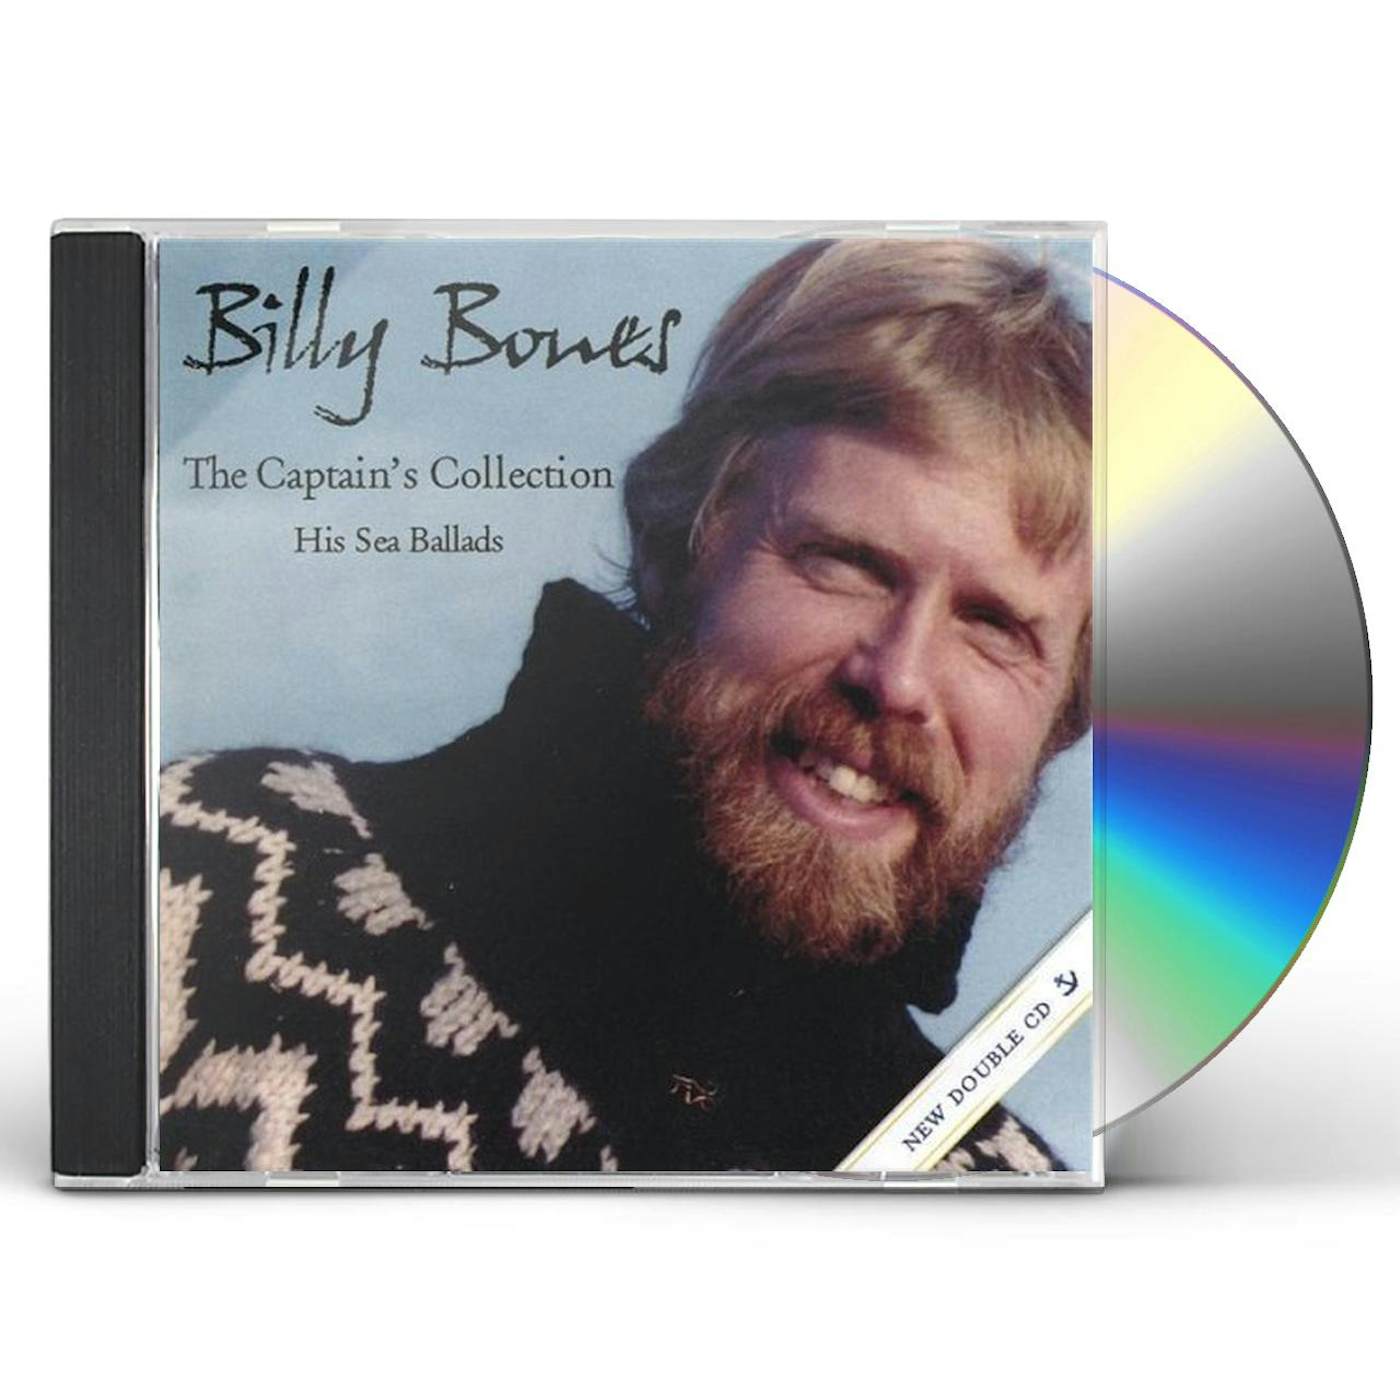 The Billybones CAPTAINS COLLECTION CD